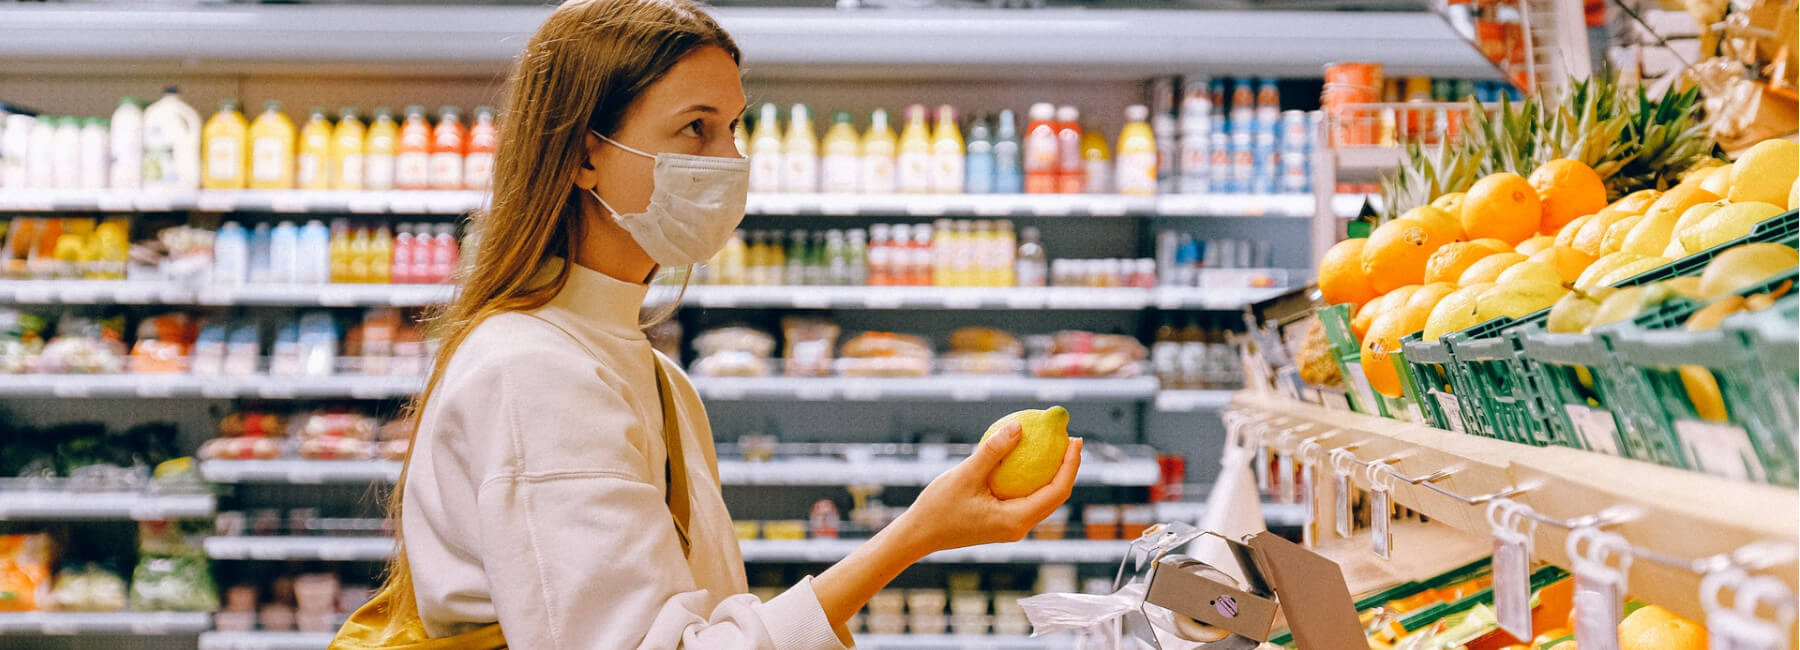 How the Retail Industry Has Been Affected by The Global Pandemic